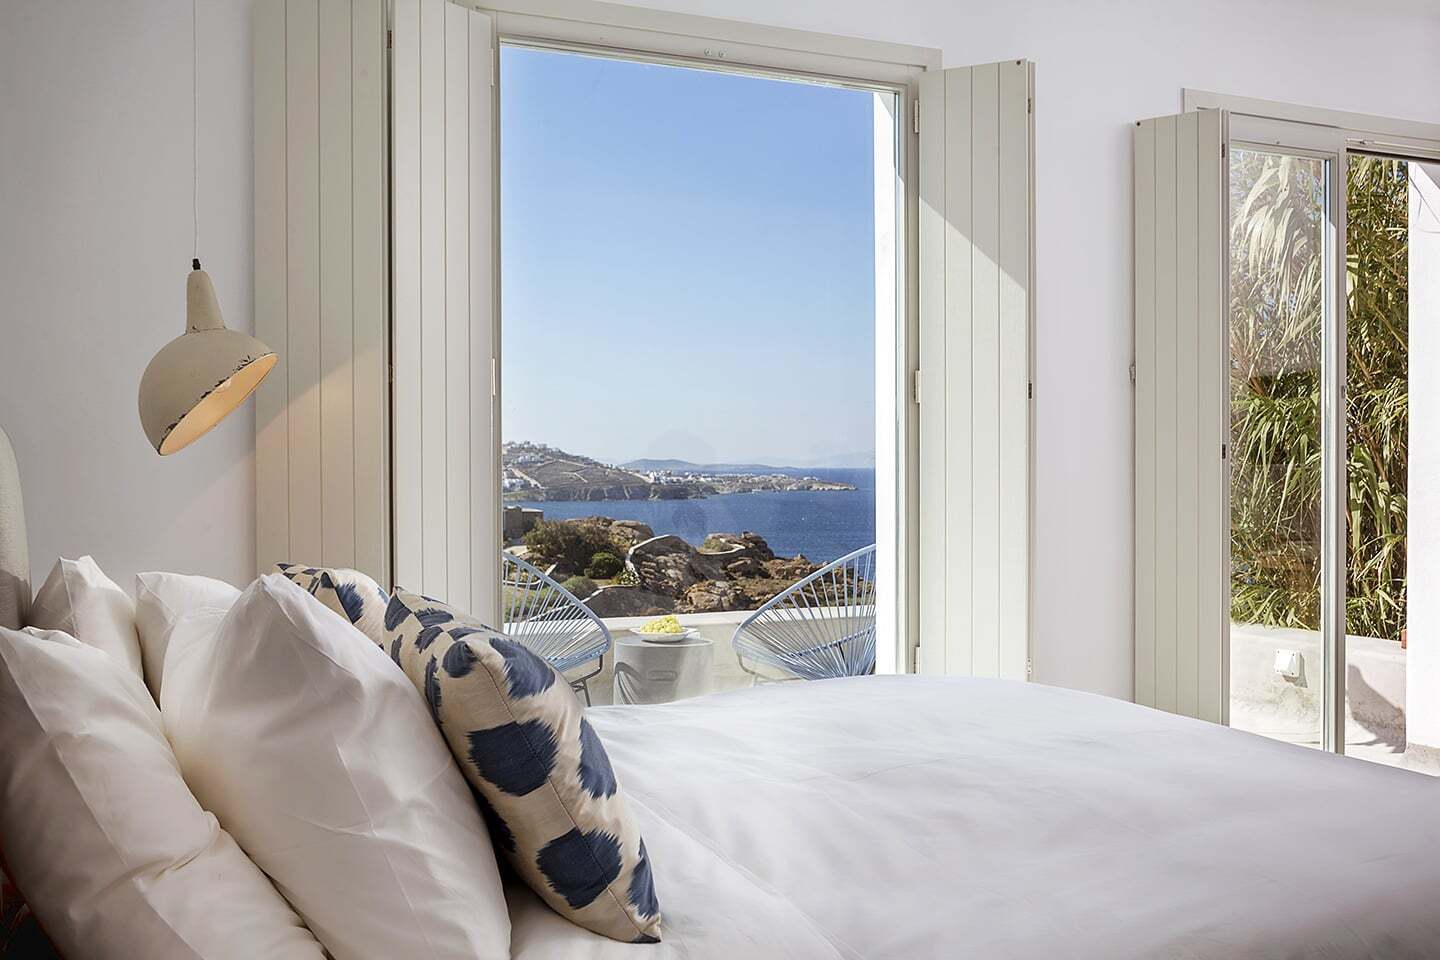 Where to stay in Mykonos: the best hotels with stunning views of the Aegean Sea